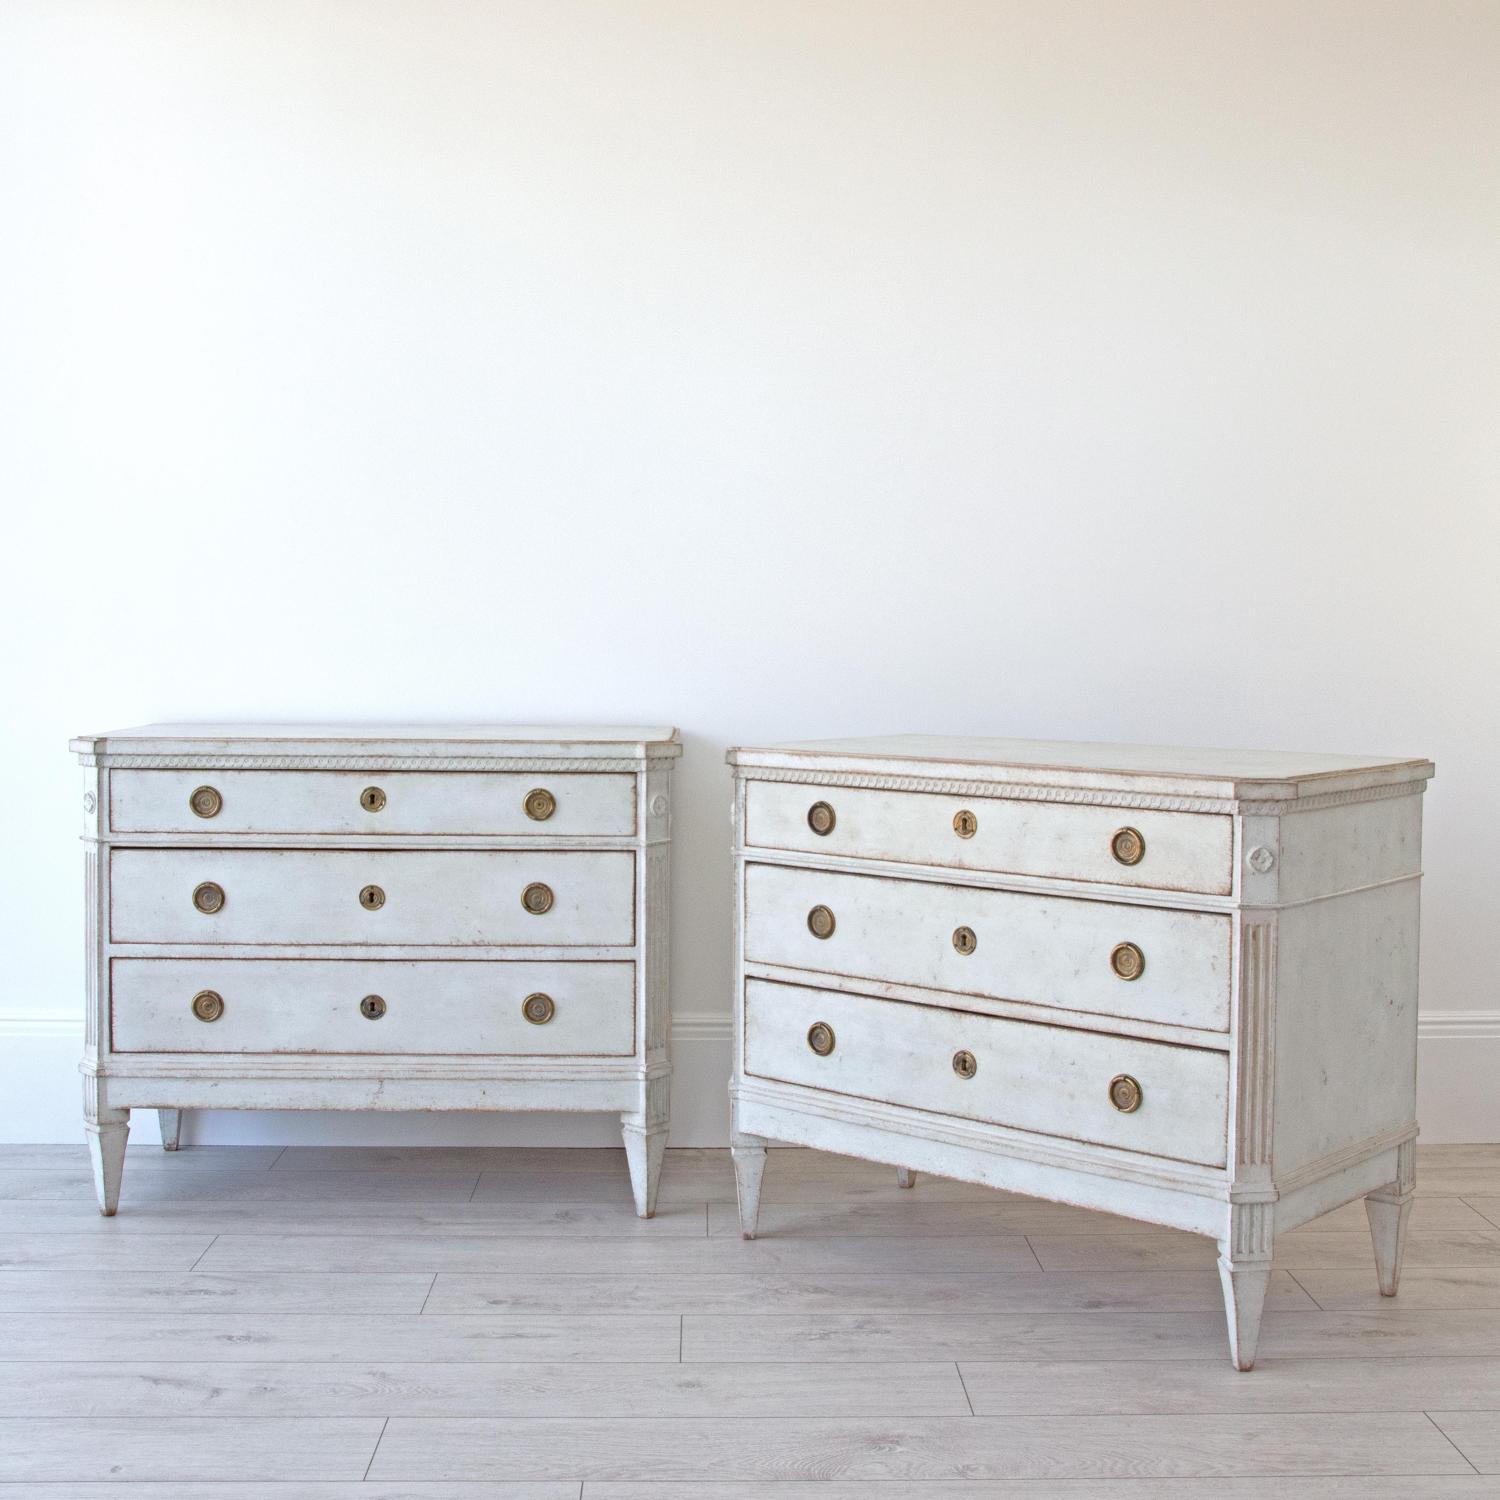 GUSTAVIAN STYLE CHESTS